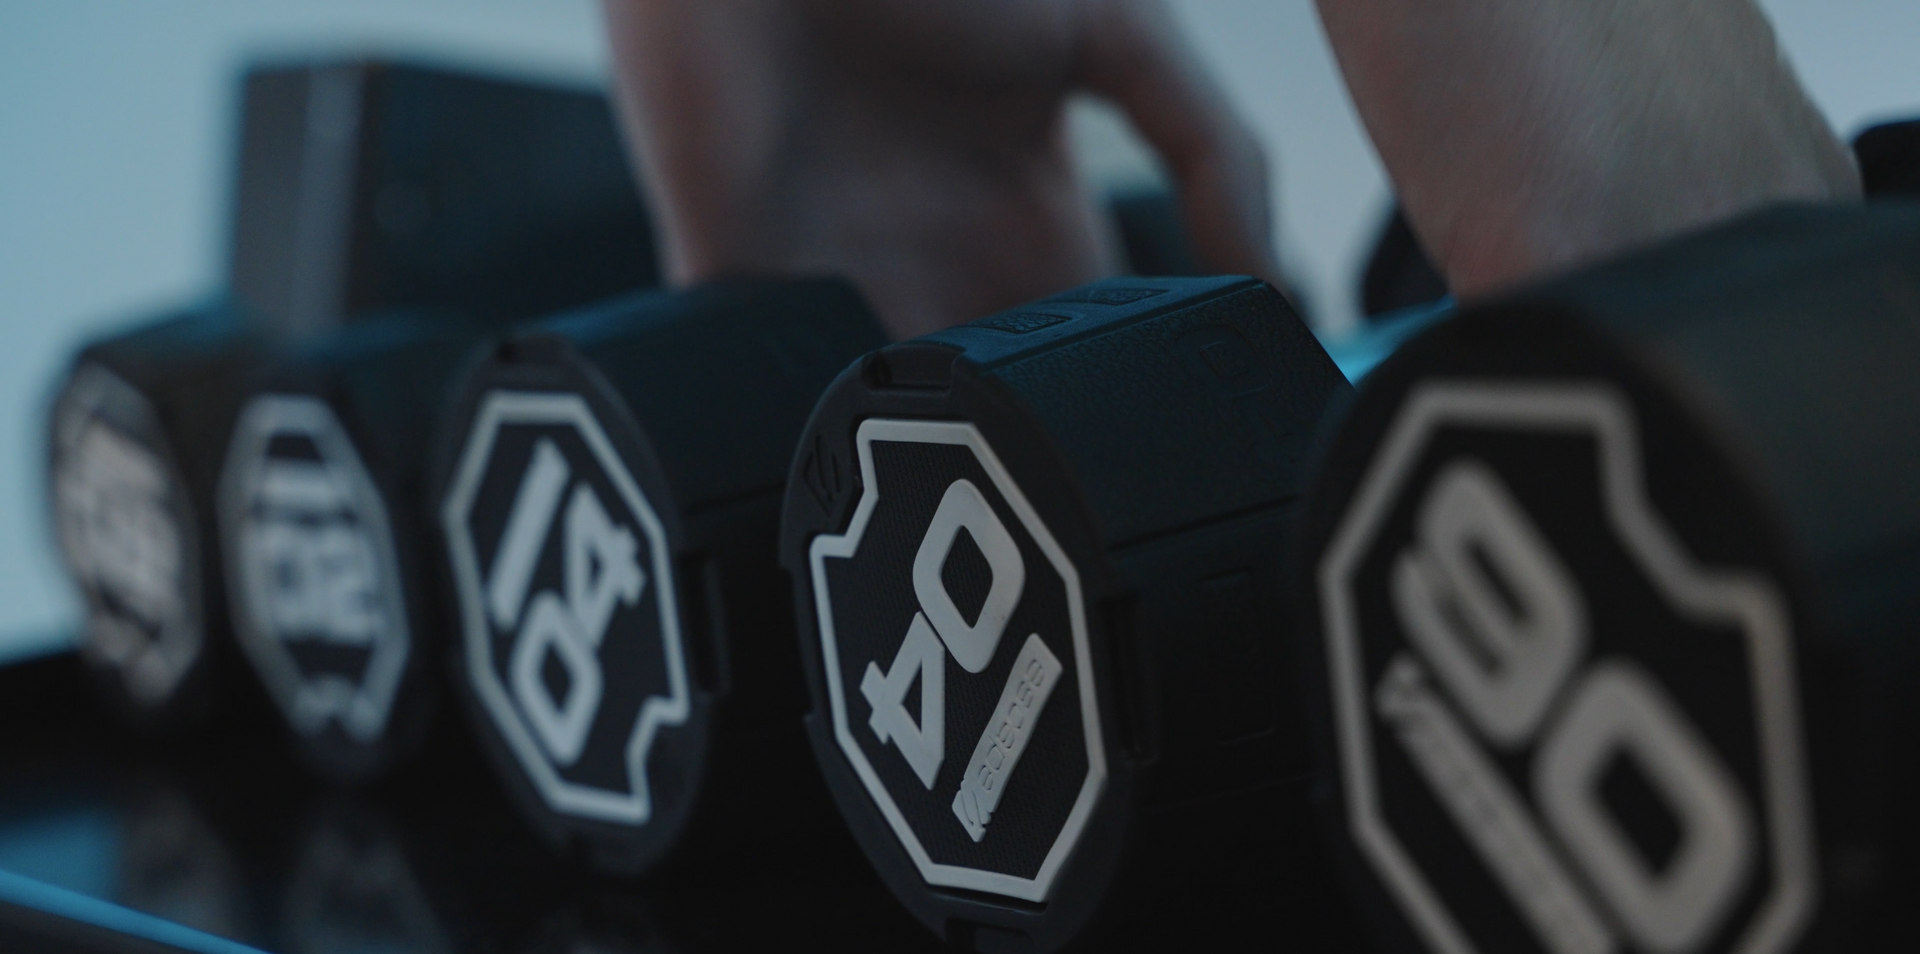 A row of black dumbbells with white numbers on them.